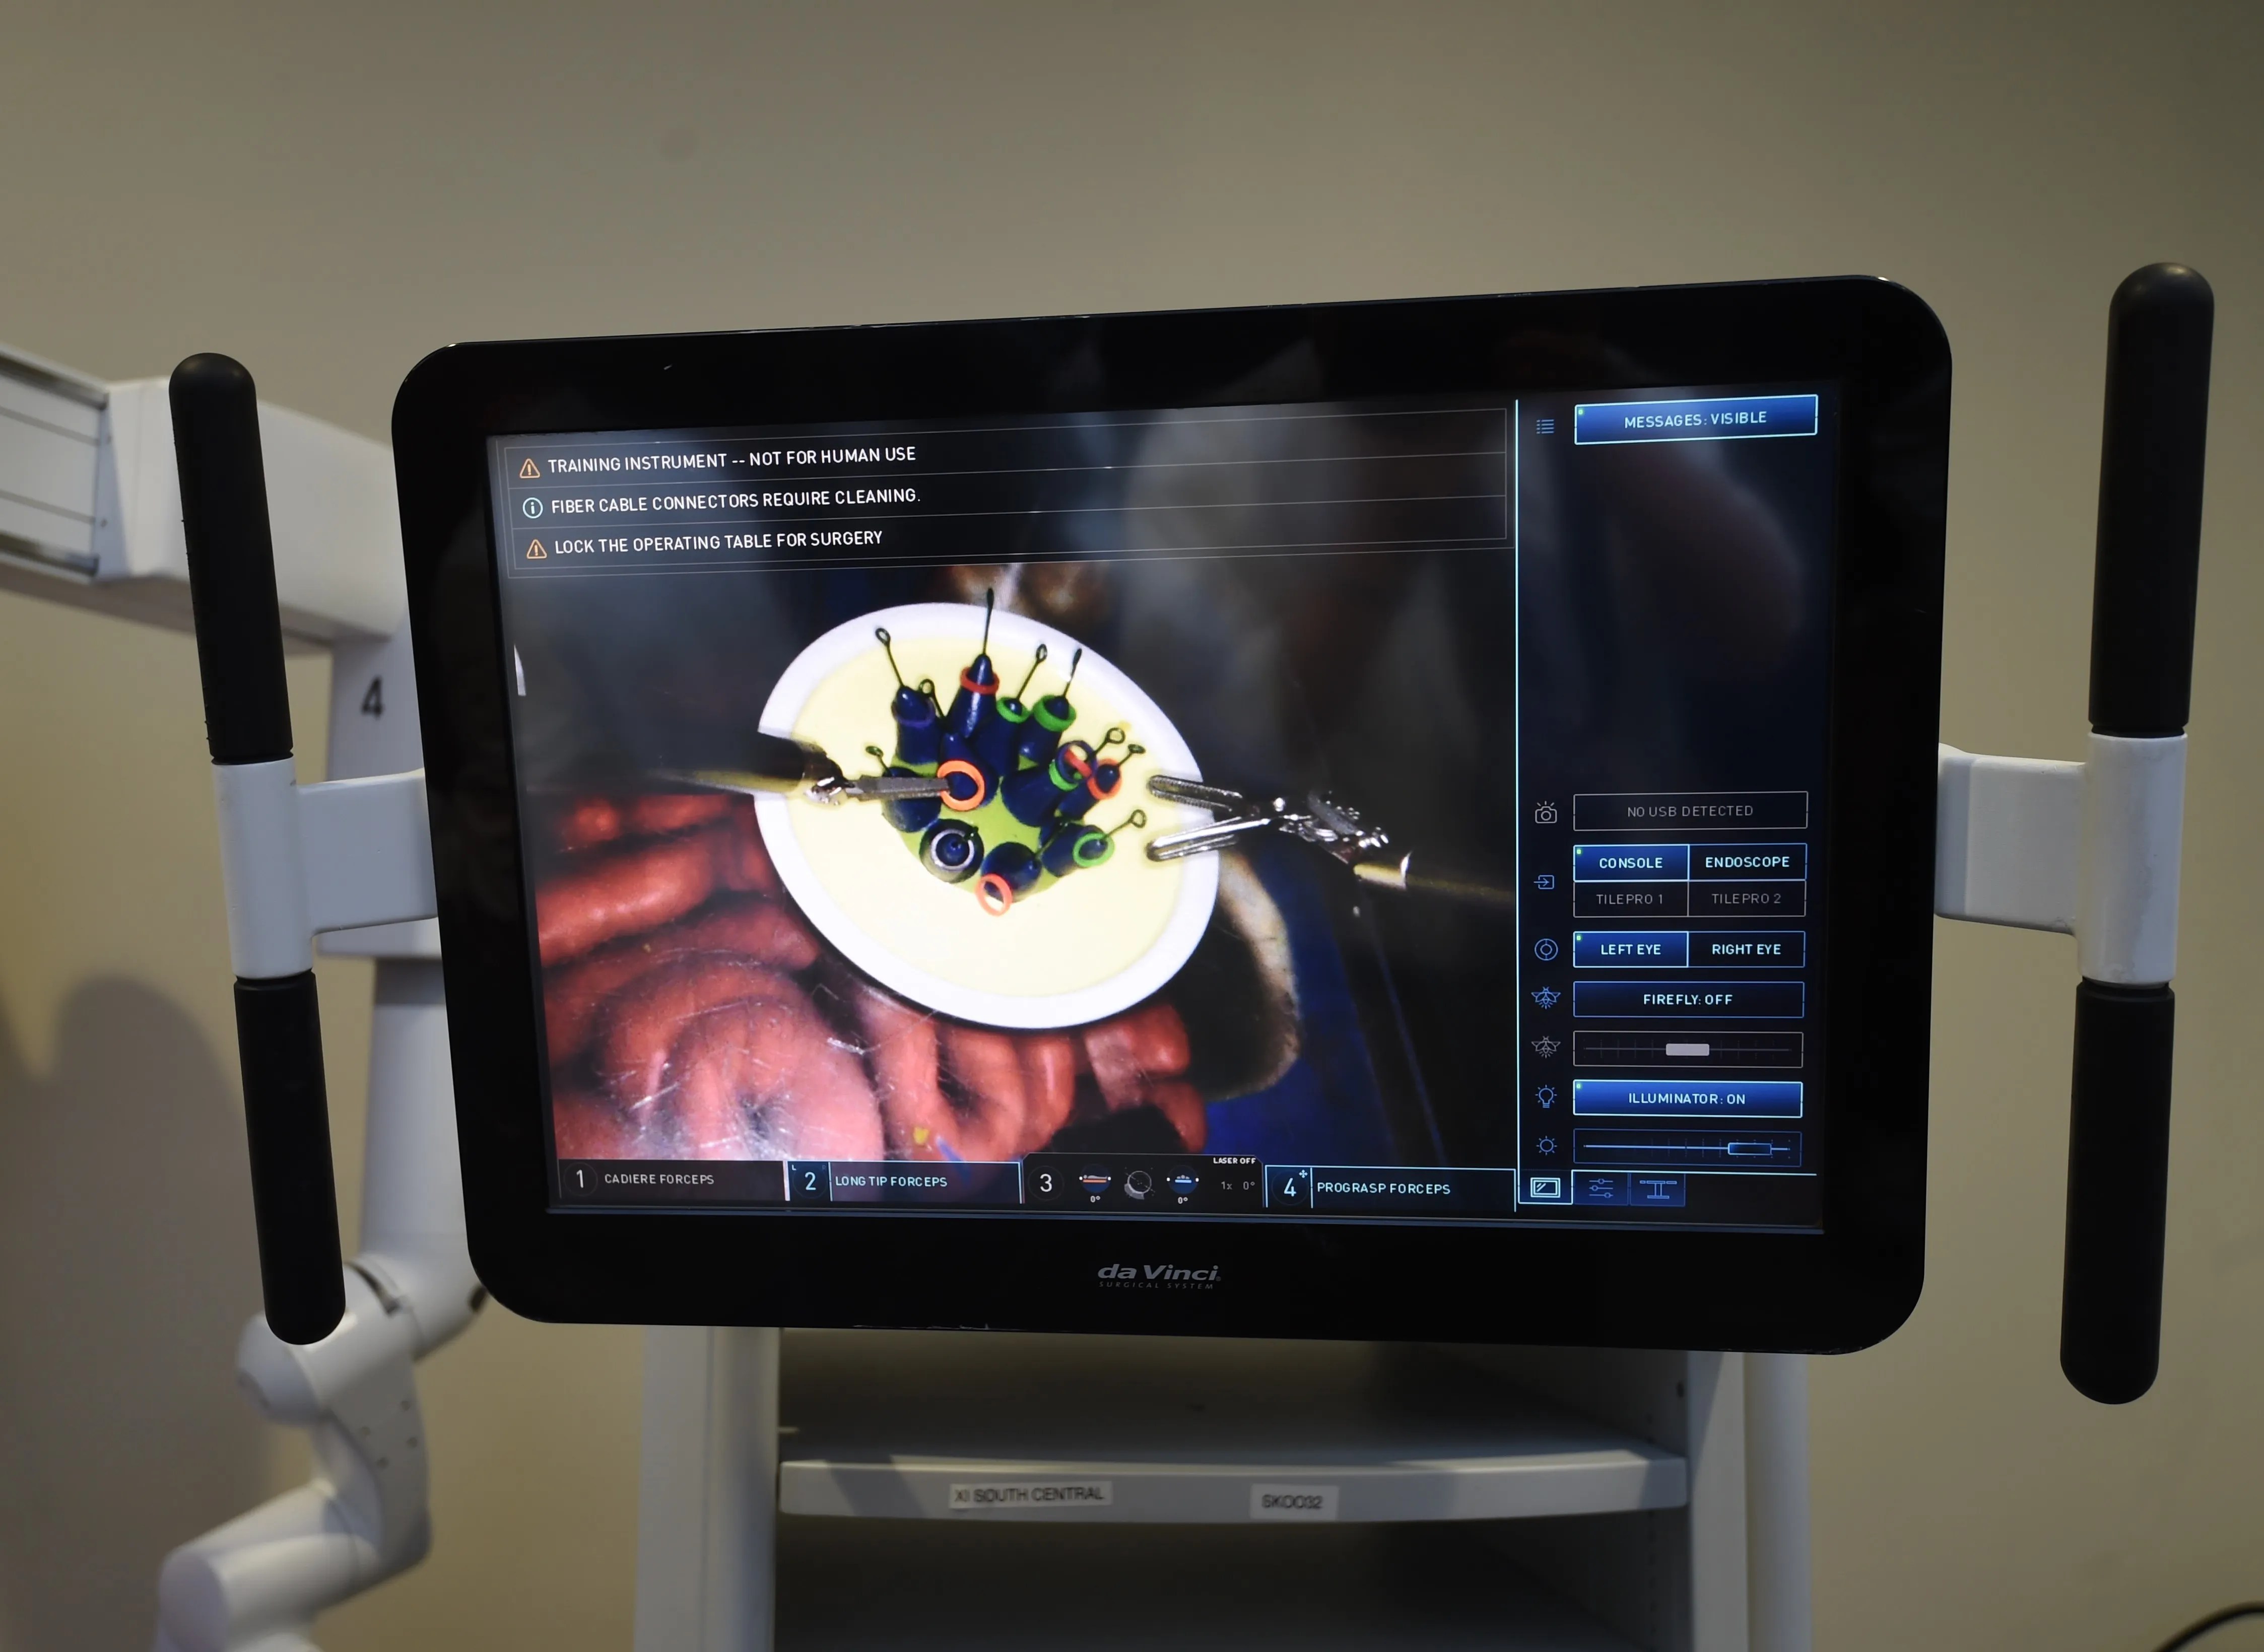 This overhead display shows the view from the camera in the da Vinci Xi surgical system. The robot has four arms and allows surgeons to conduct minimally invasive surgeries.